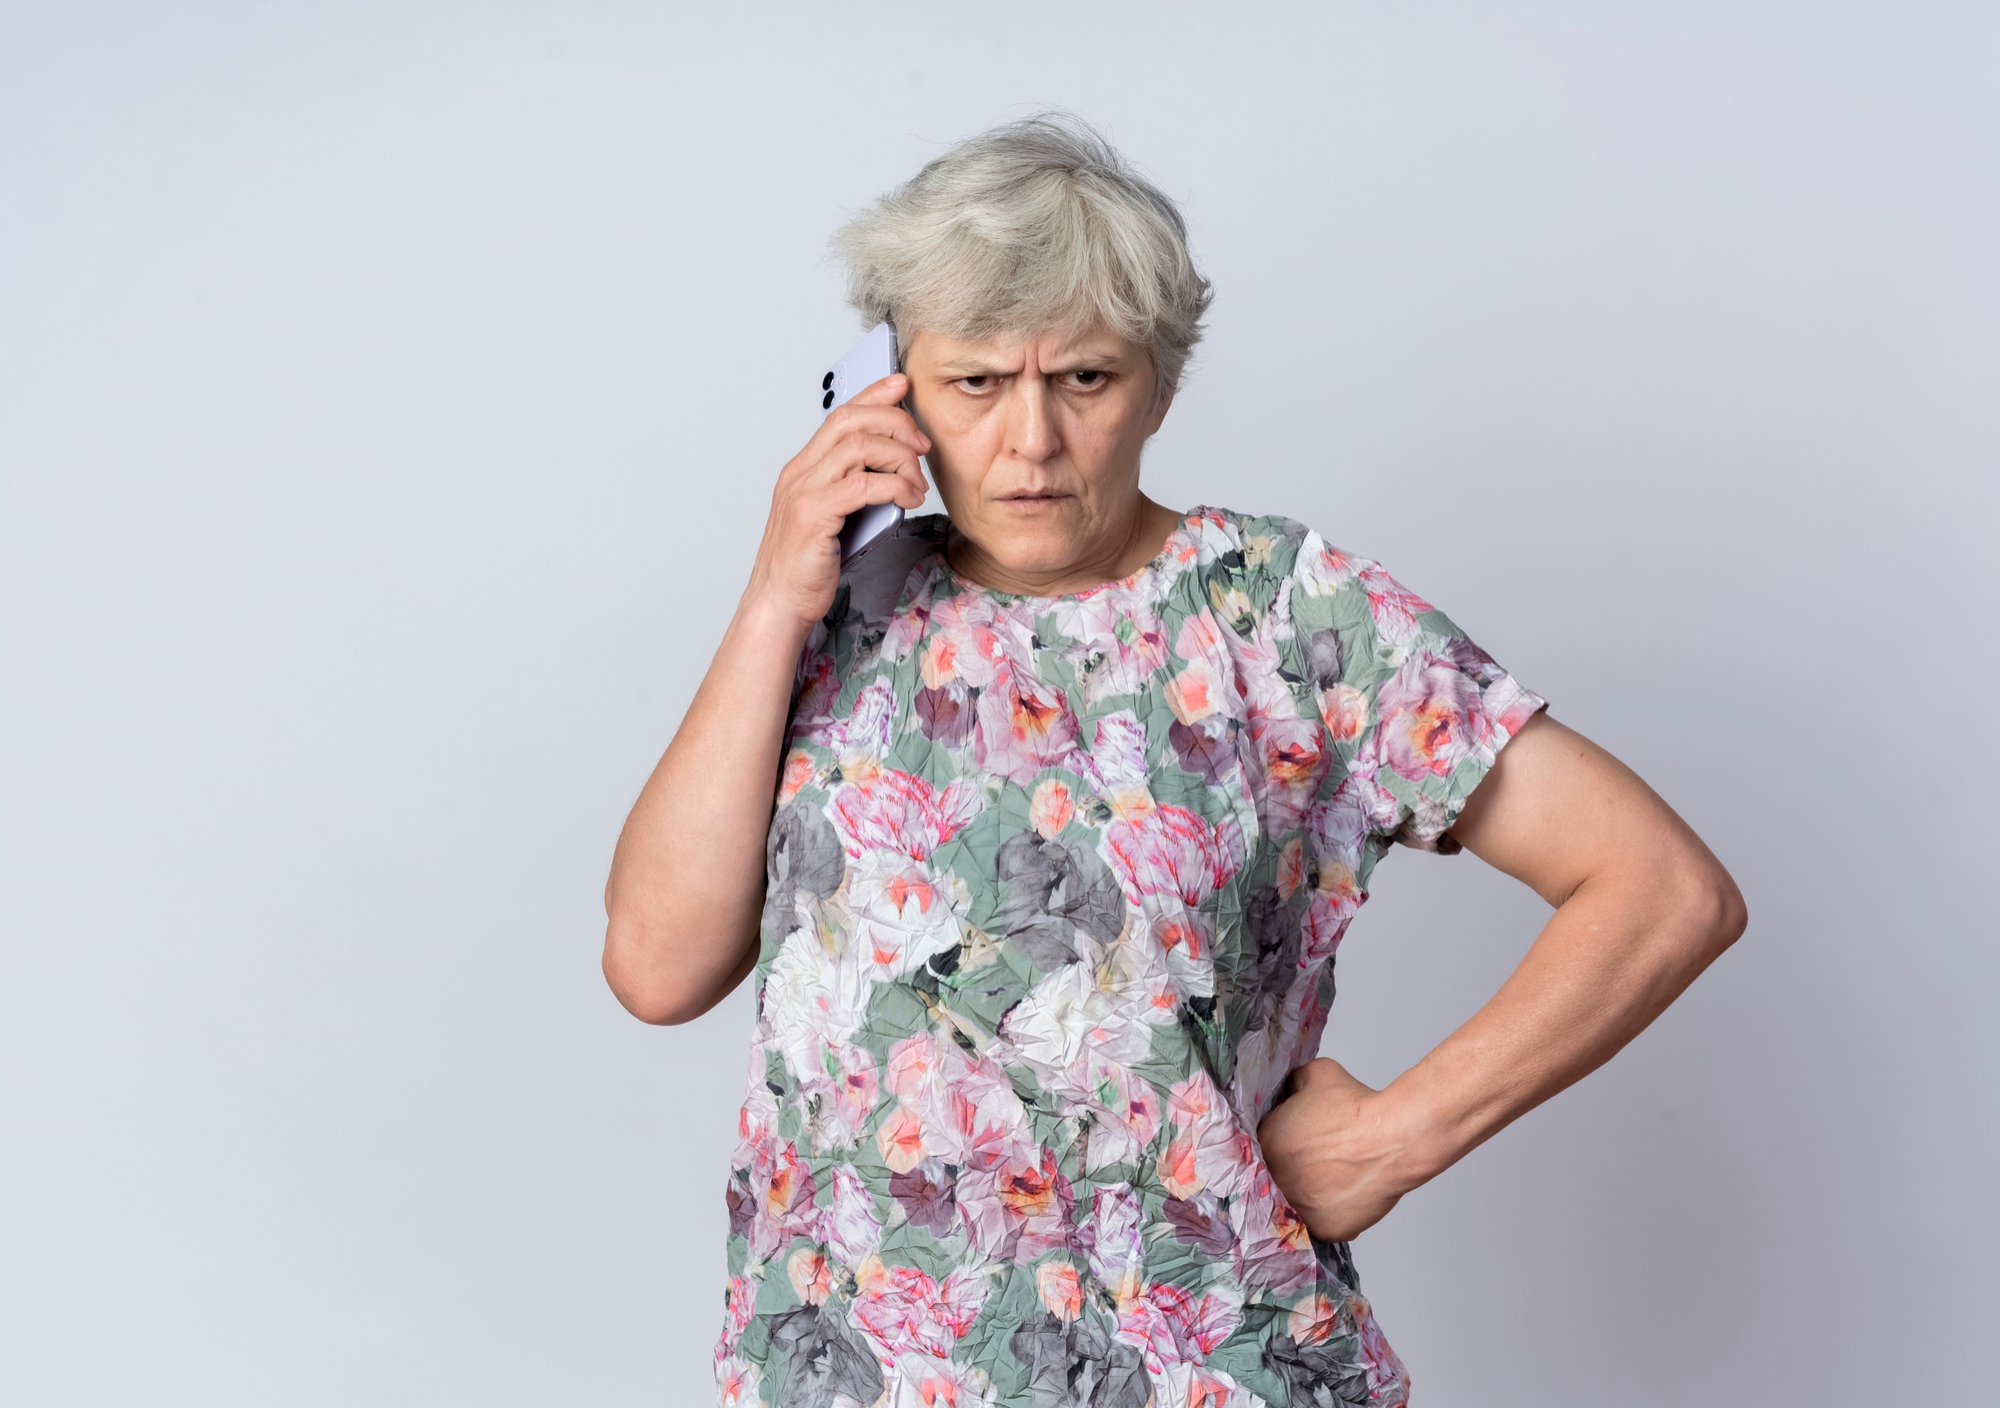 An angry older woman talking on the phone | Source: Freepik